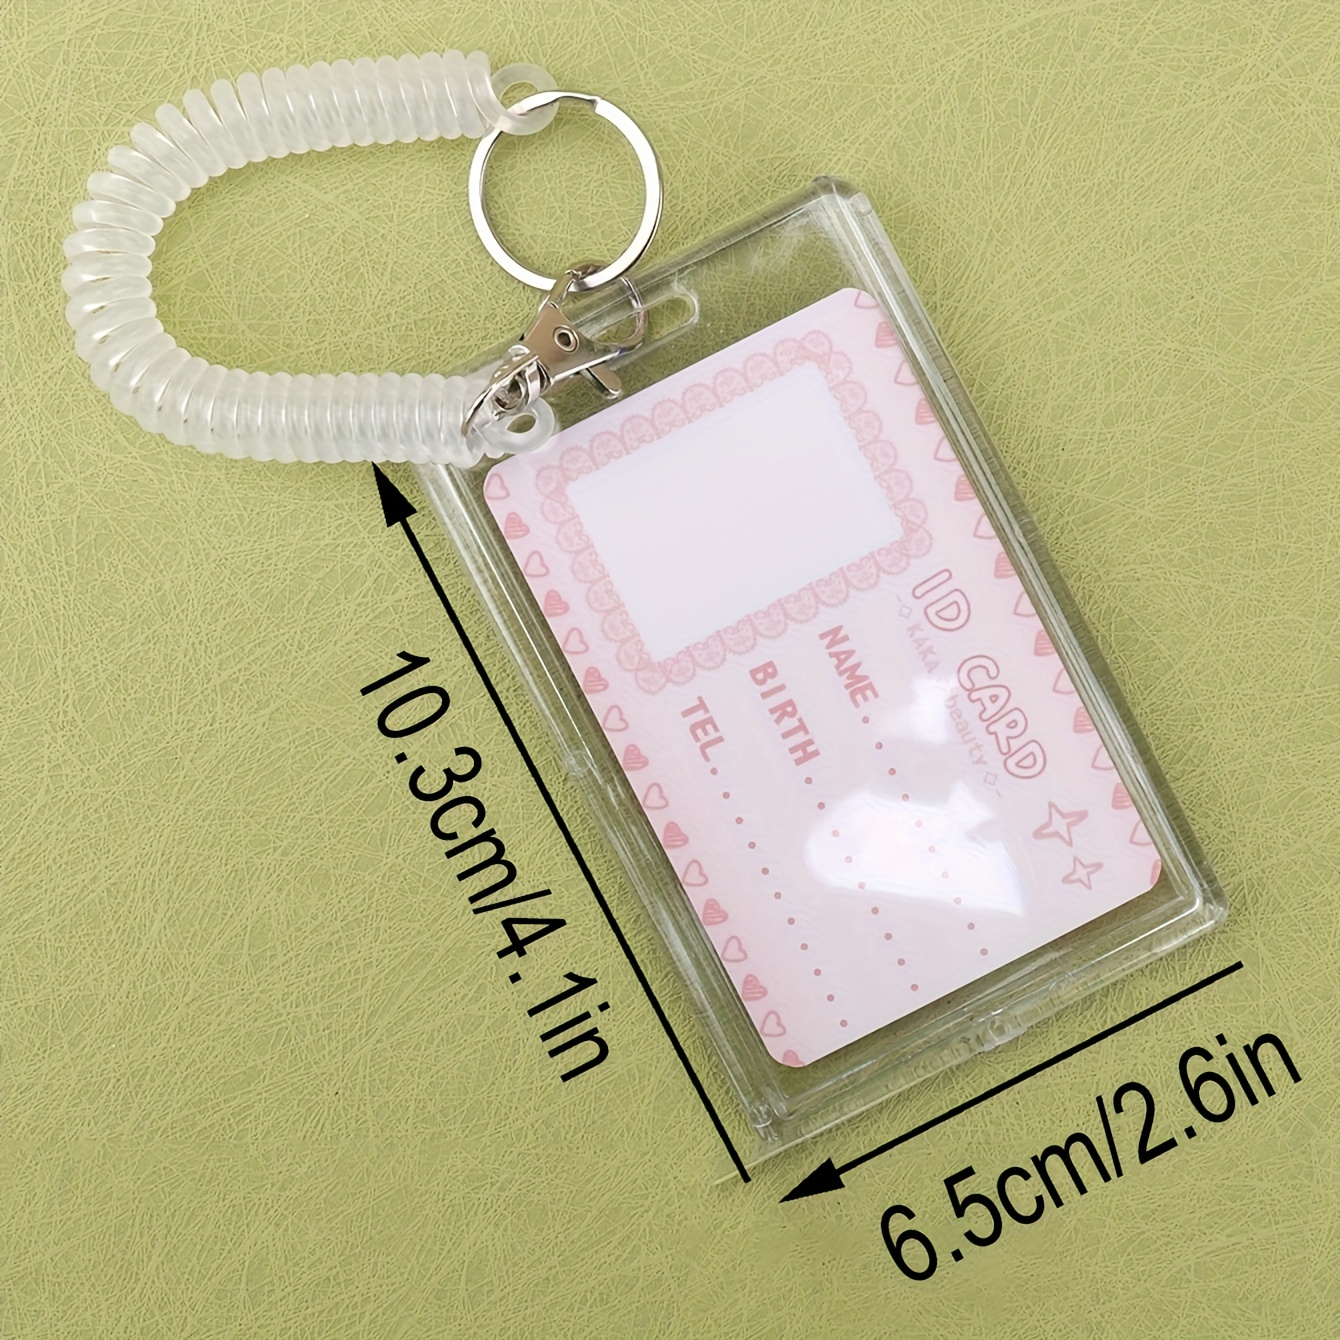 1pc Card Holder & 1pc Keychain, Creative Transparent Acrylic Card Protector for Student ID Card and Meal Card, with Key Ring,one-size